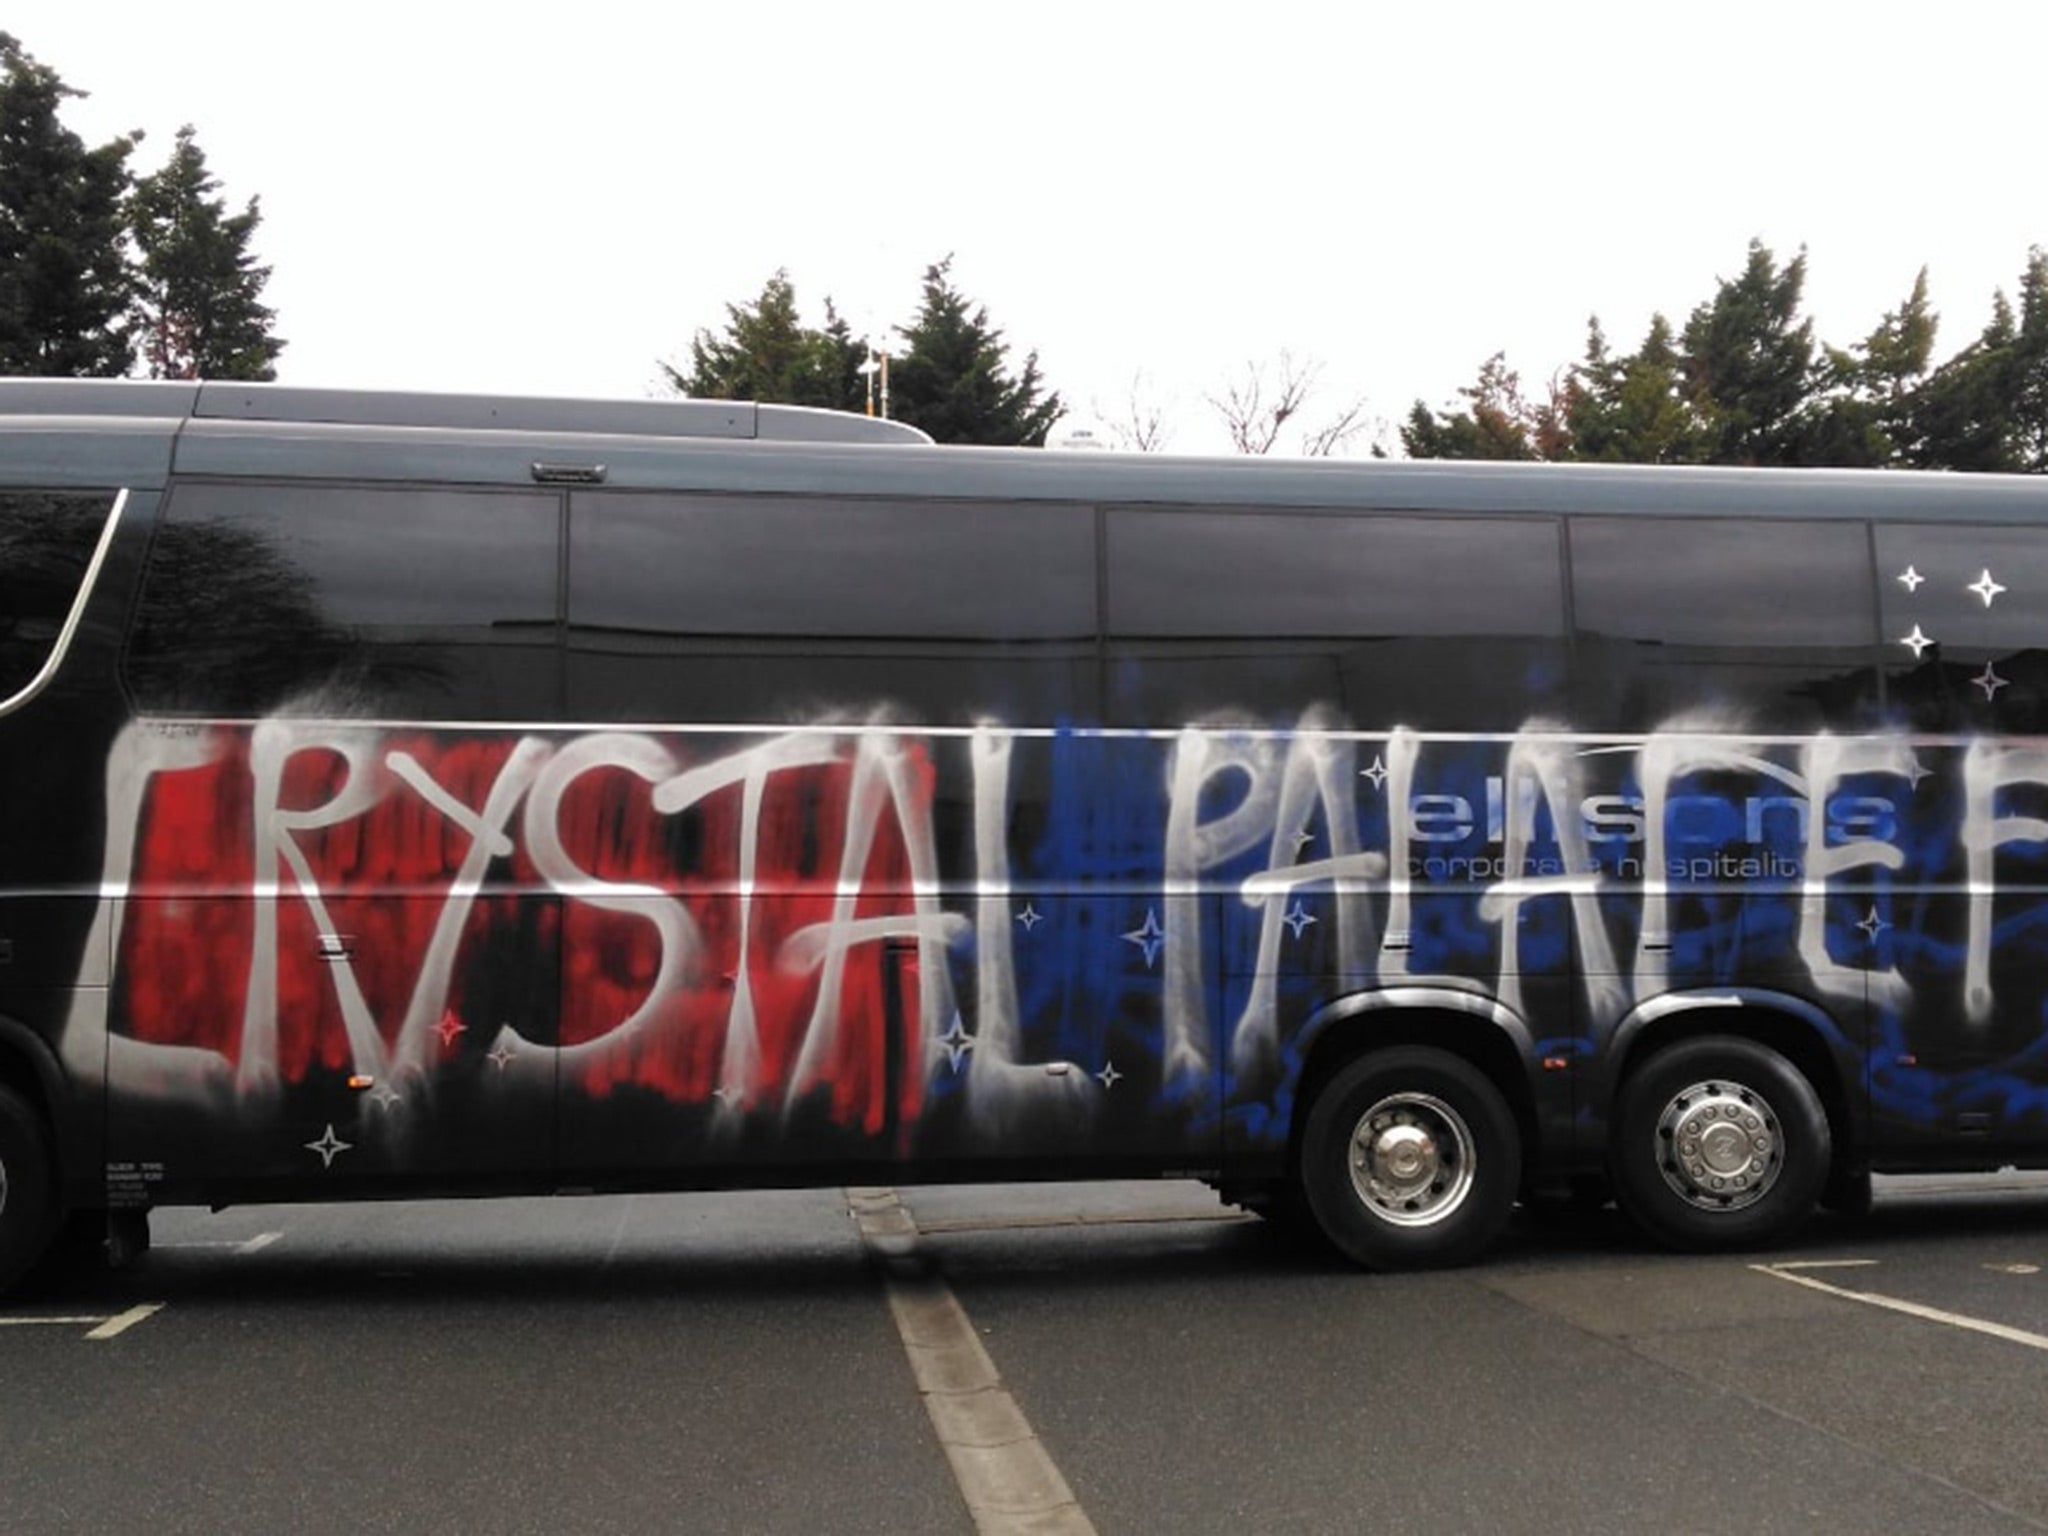 Supporters believed that the coach was owned by their opponents Middlesbrough